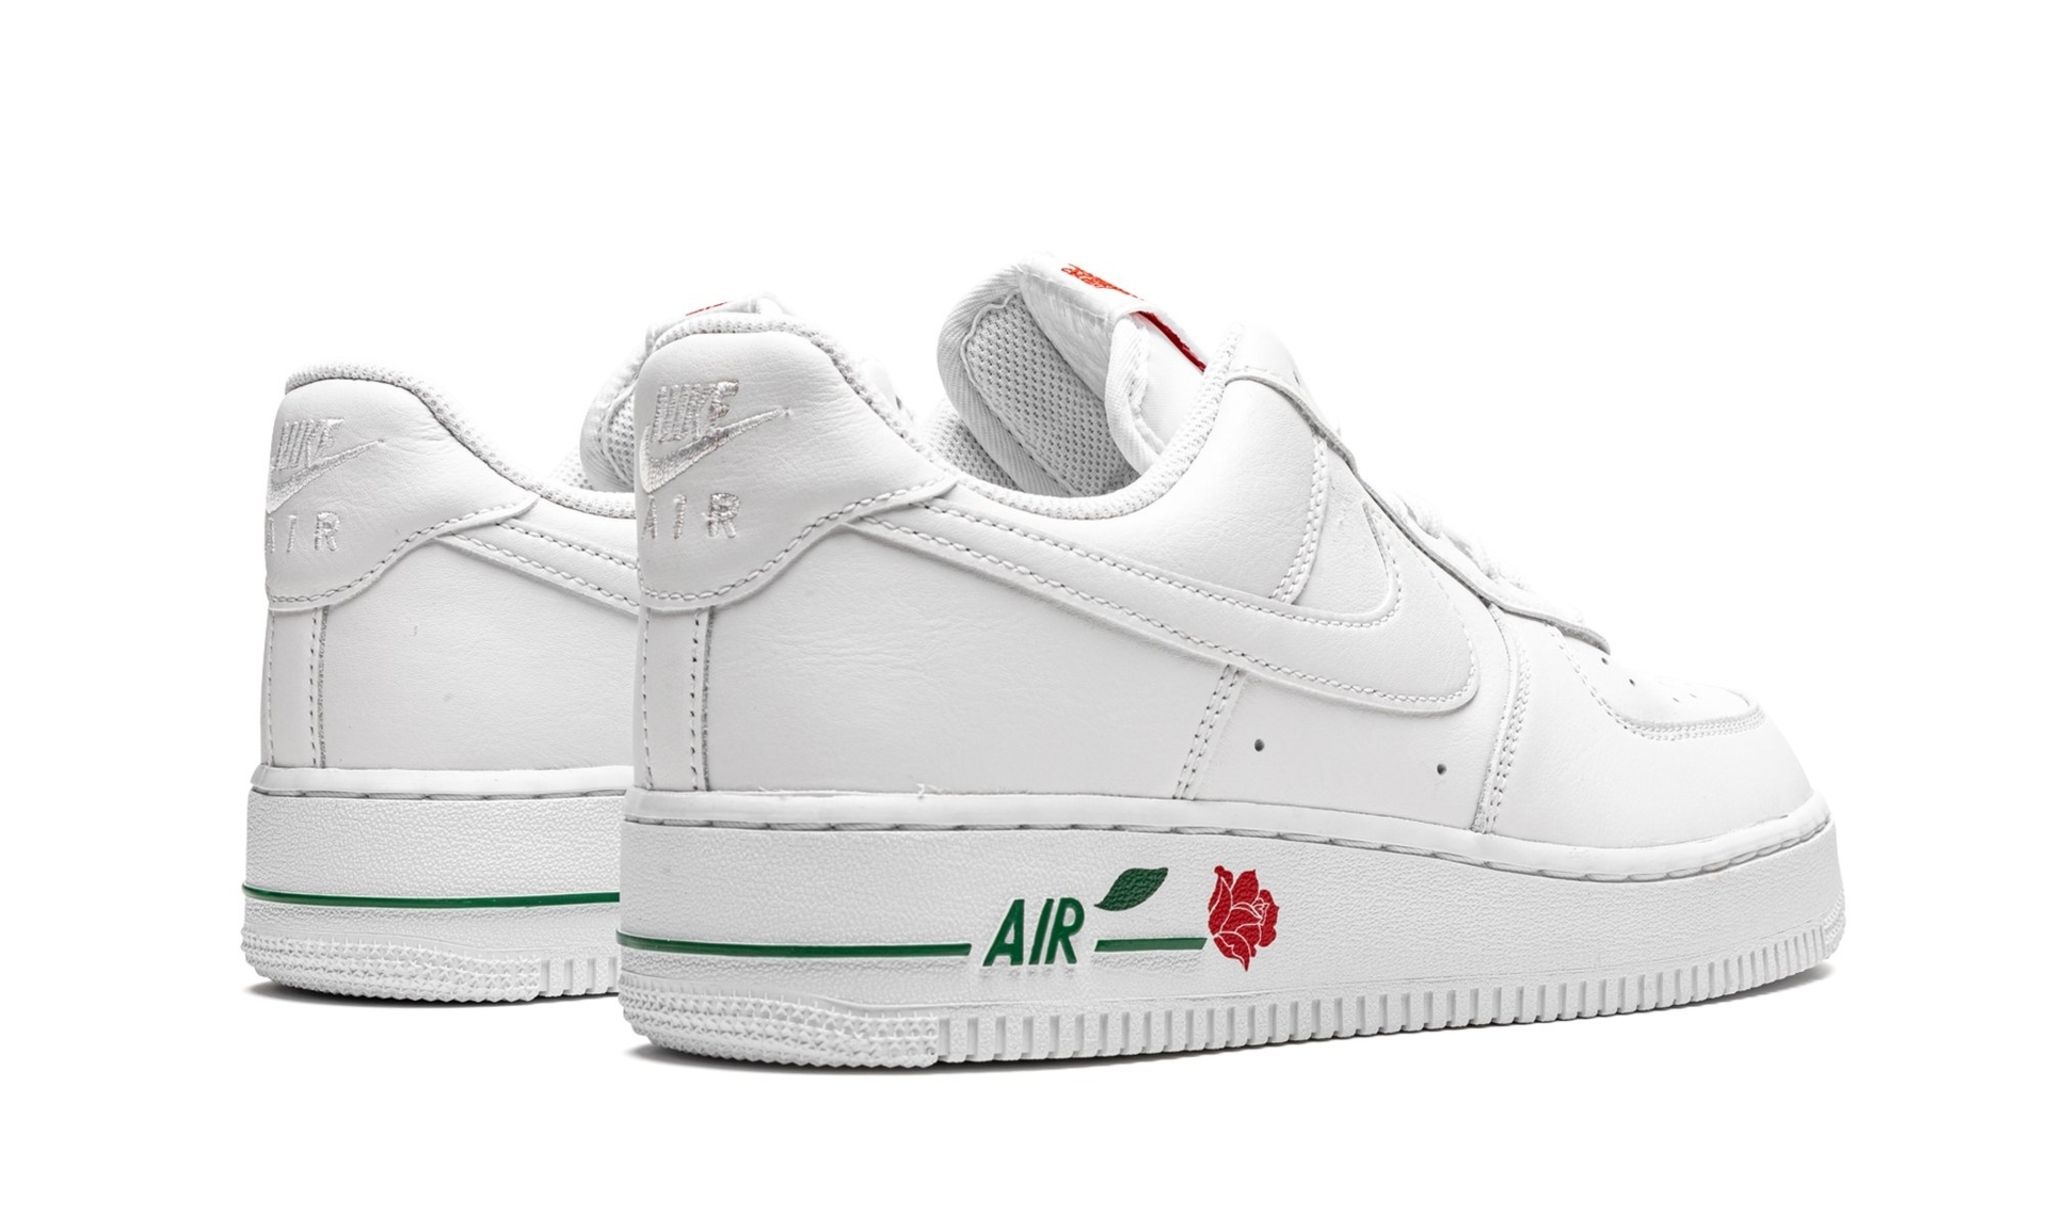 Air Force 1 Low '07 LX "Thank You Plastic Bag" - 3